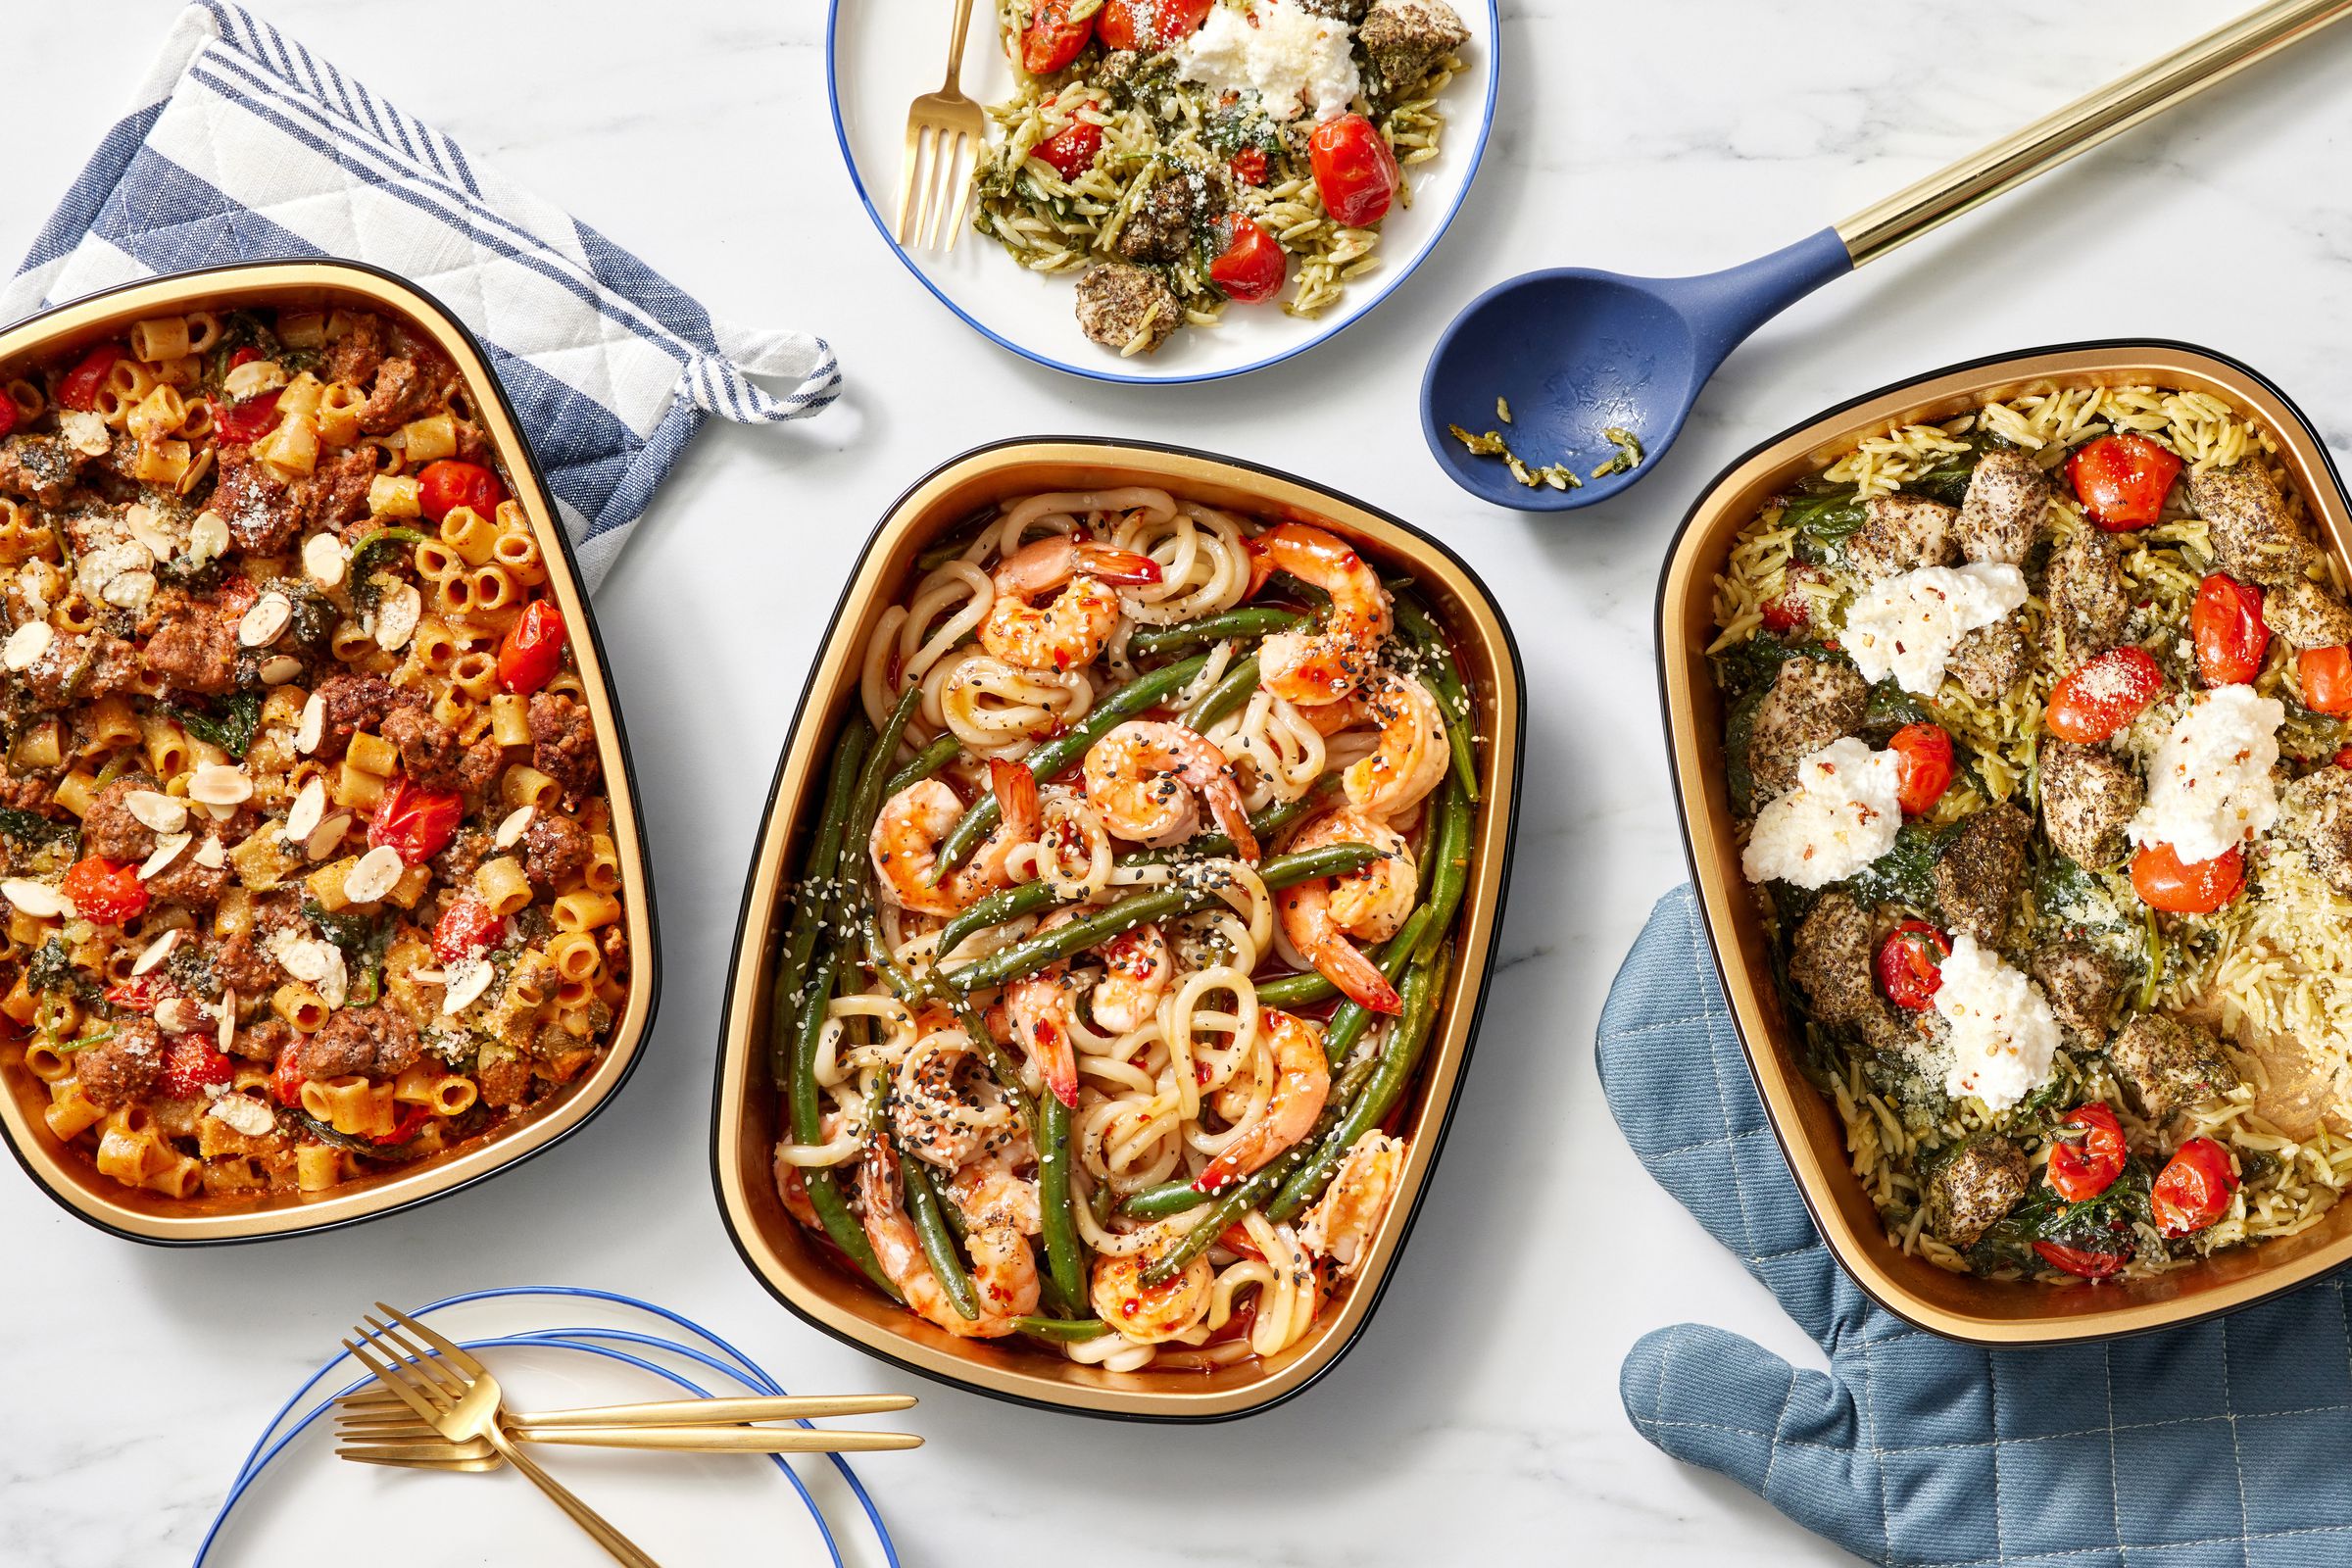 Some assembly required. Blue Apron’s new Ready to Cook meals mean even less effort on your part.